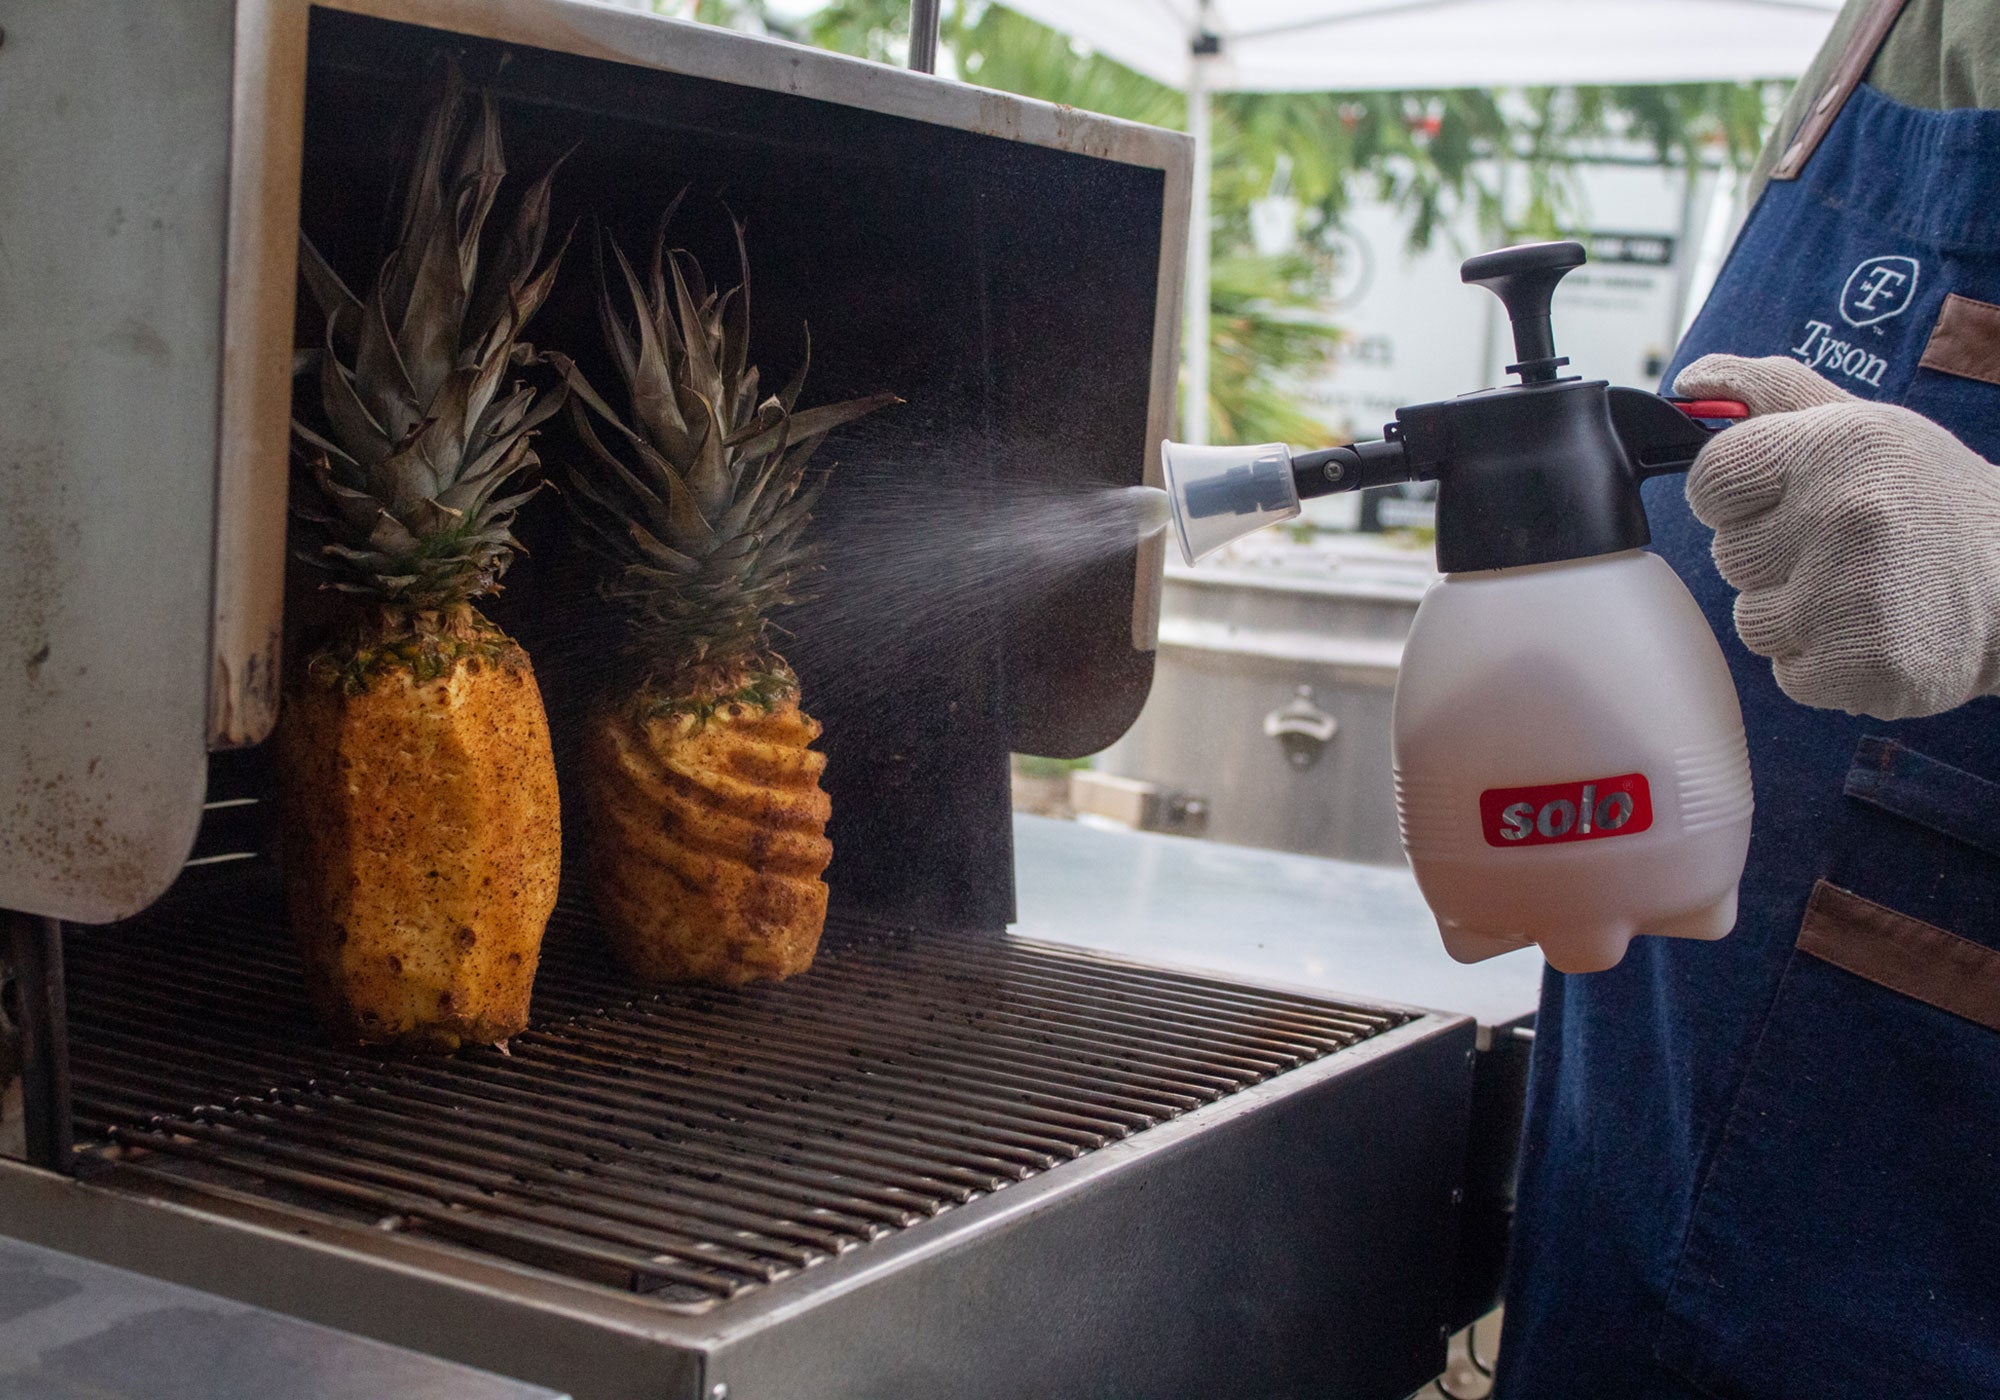 Big Poppa using his Solo Hand Sprayer to add moisture to his grilled pineapple he is cooking.